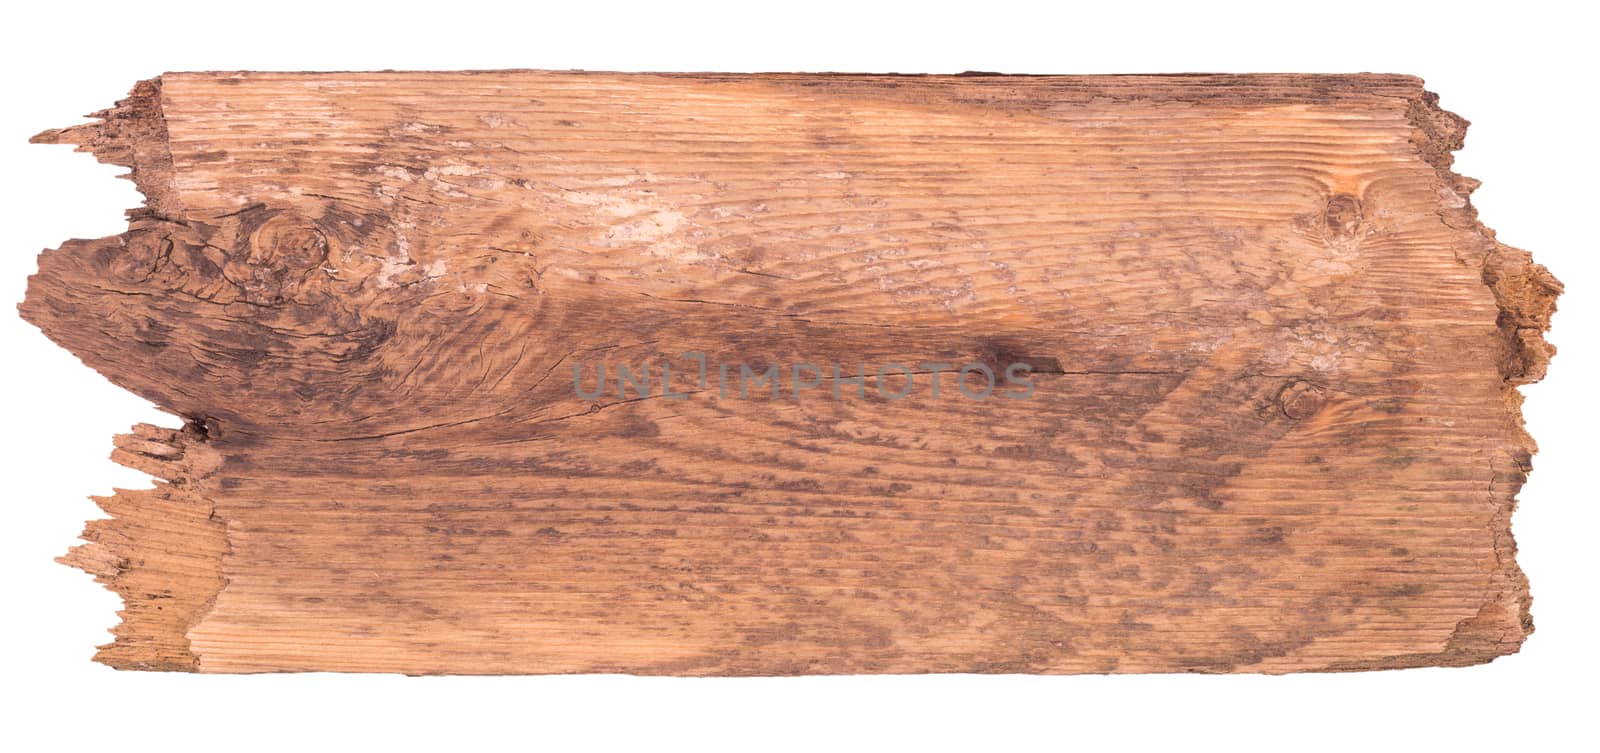 Old wooden board isolated on a white background.  by DGolbay